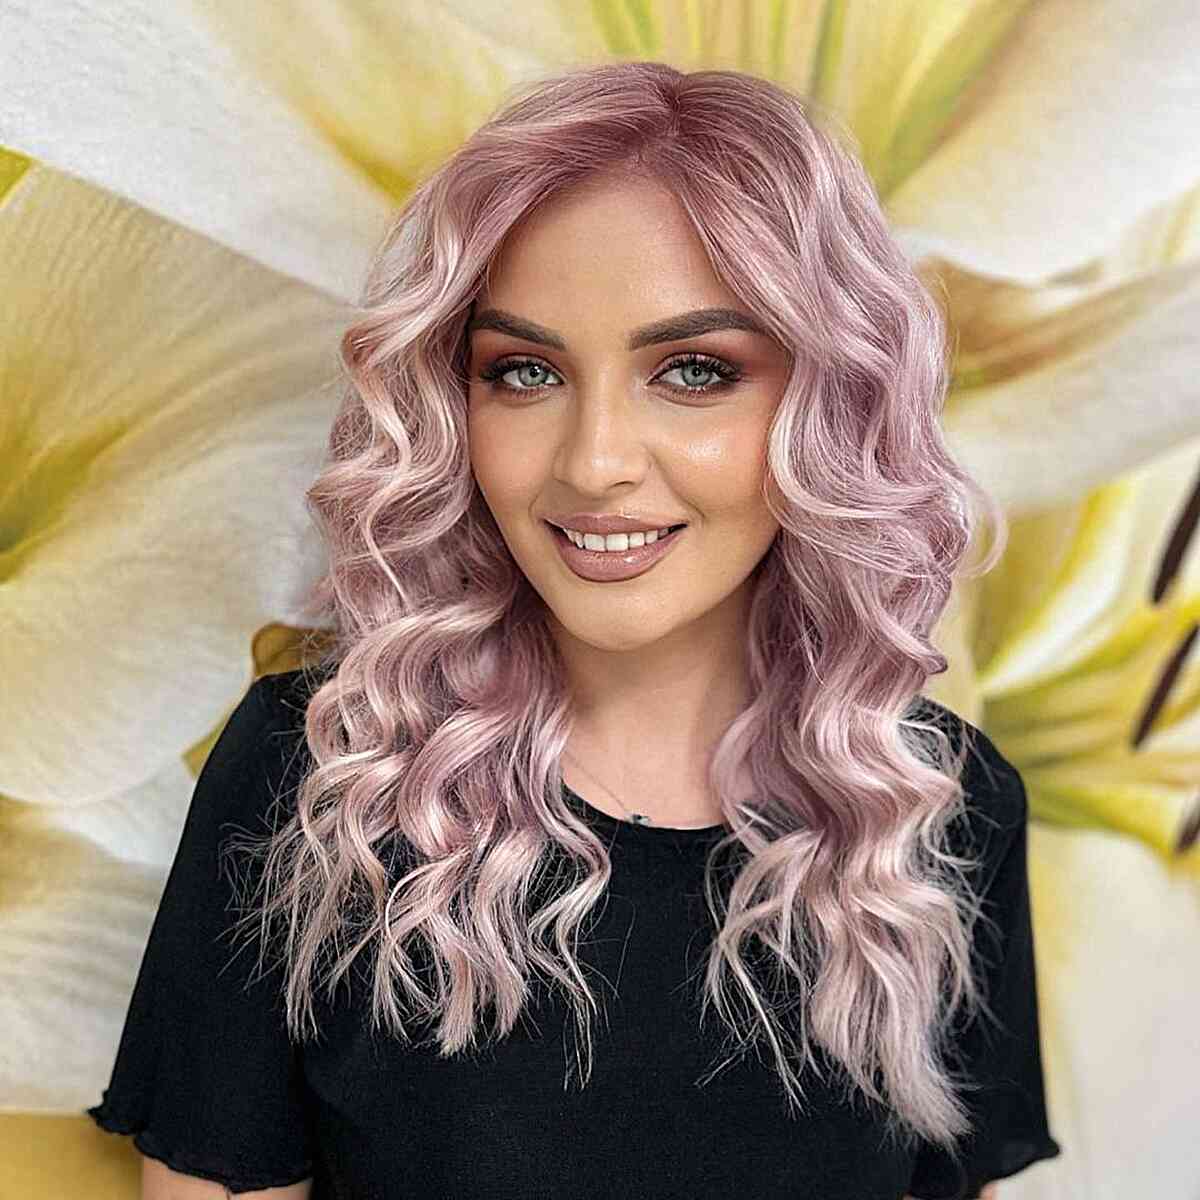 Pink Curled Mid-Length Haircut for women with diamond face shapes